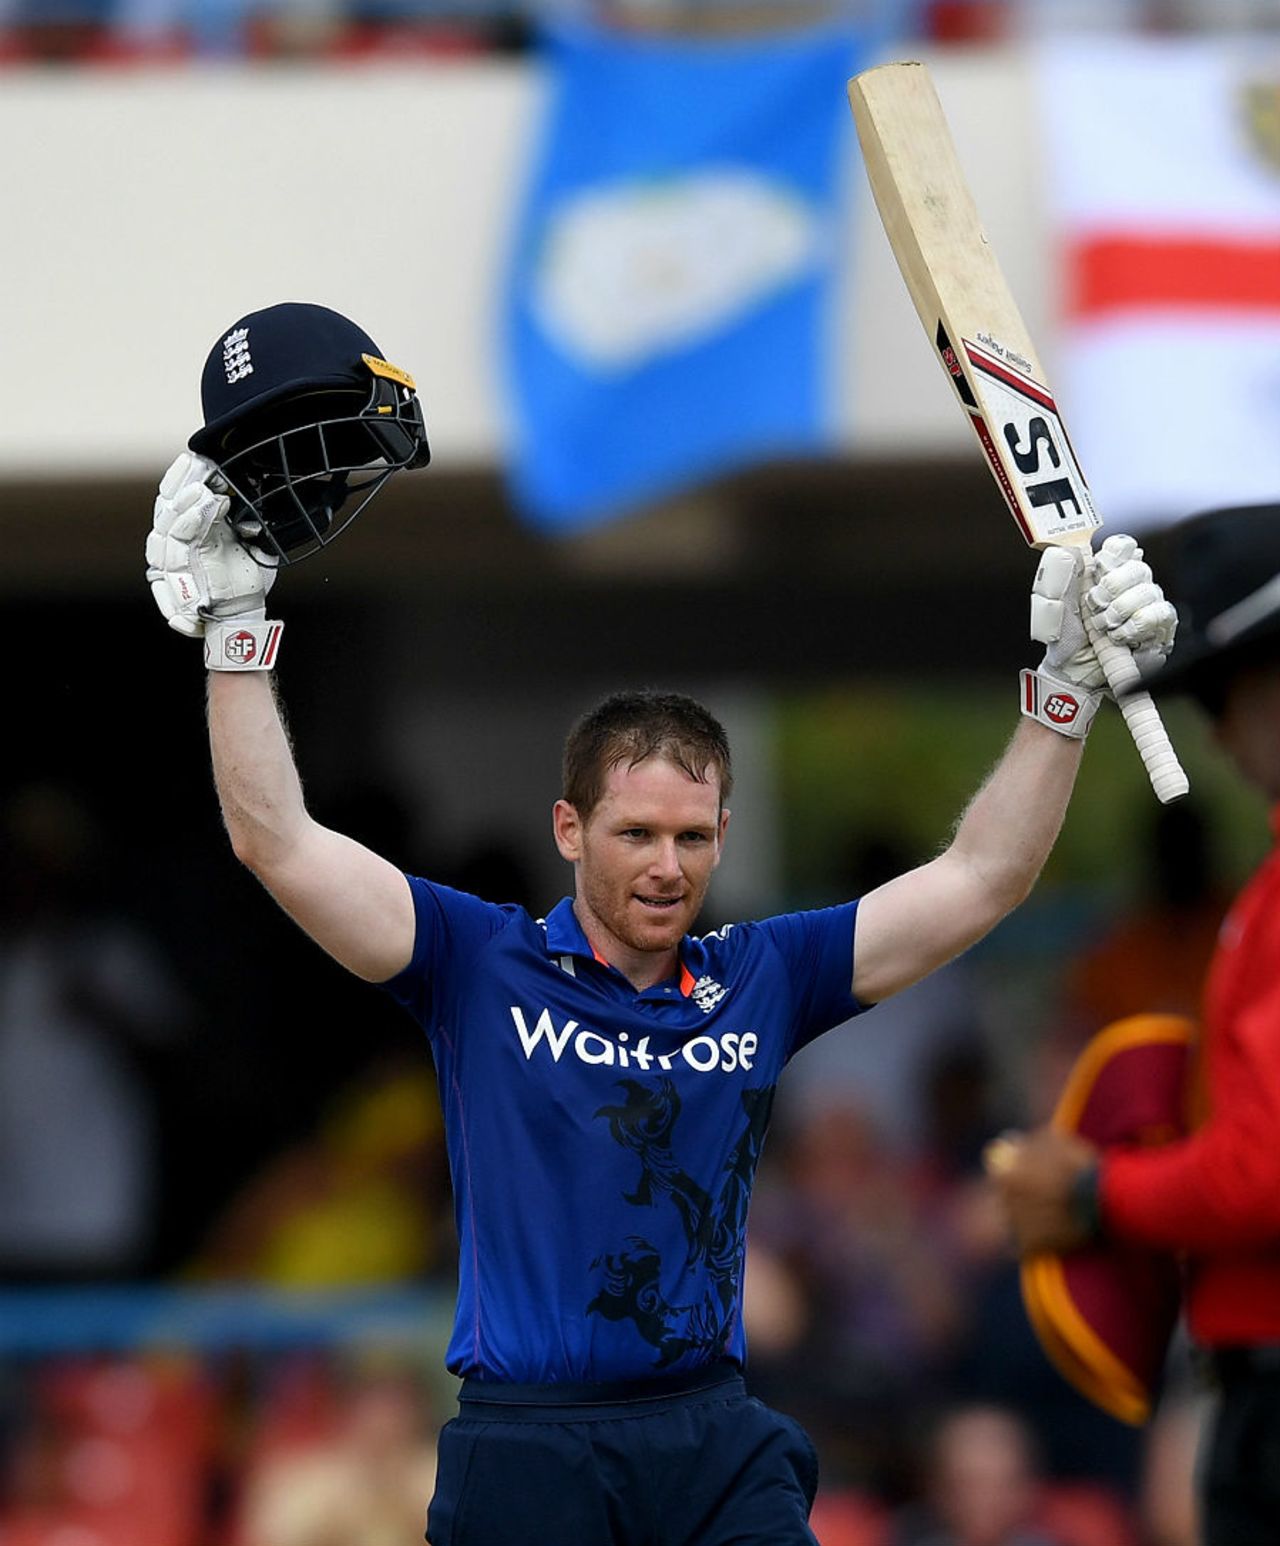 Eoin Morgan's century powered England to 296 for 6, West Indies v England, 1st ODI, Antigua, March 3, 2017